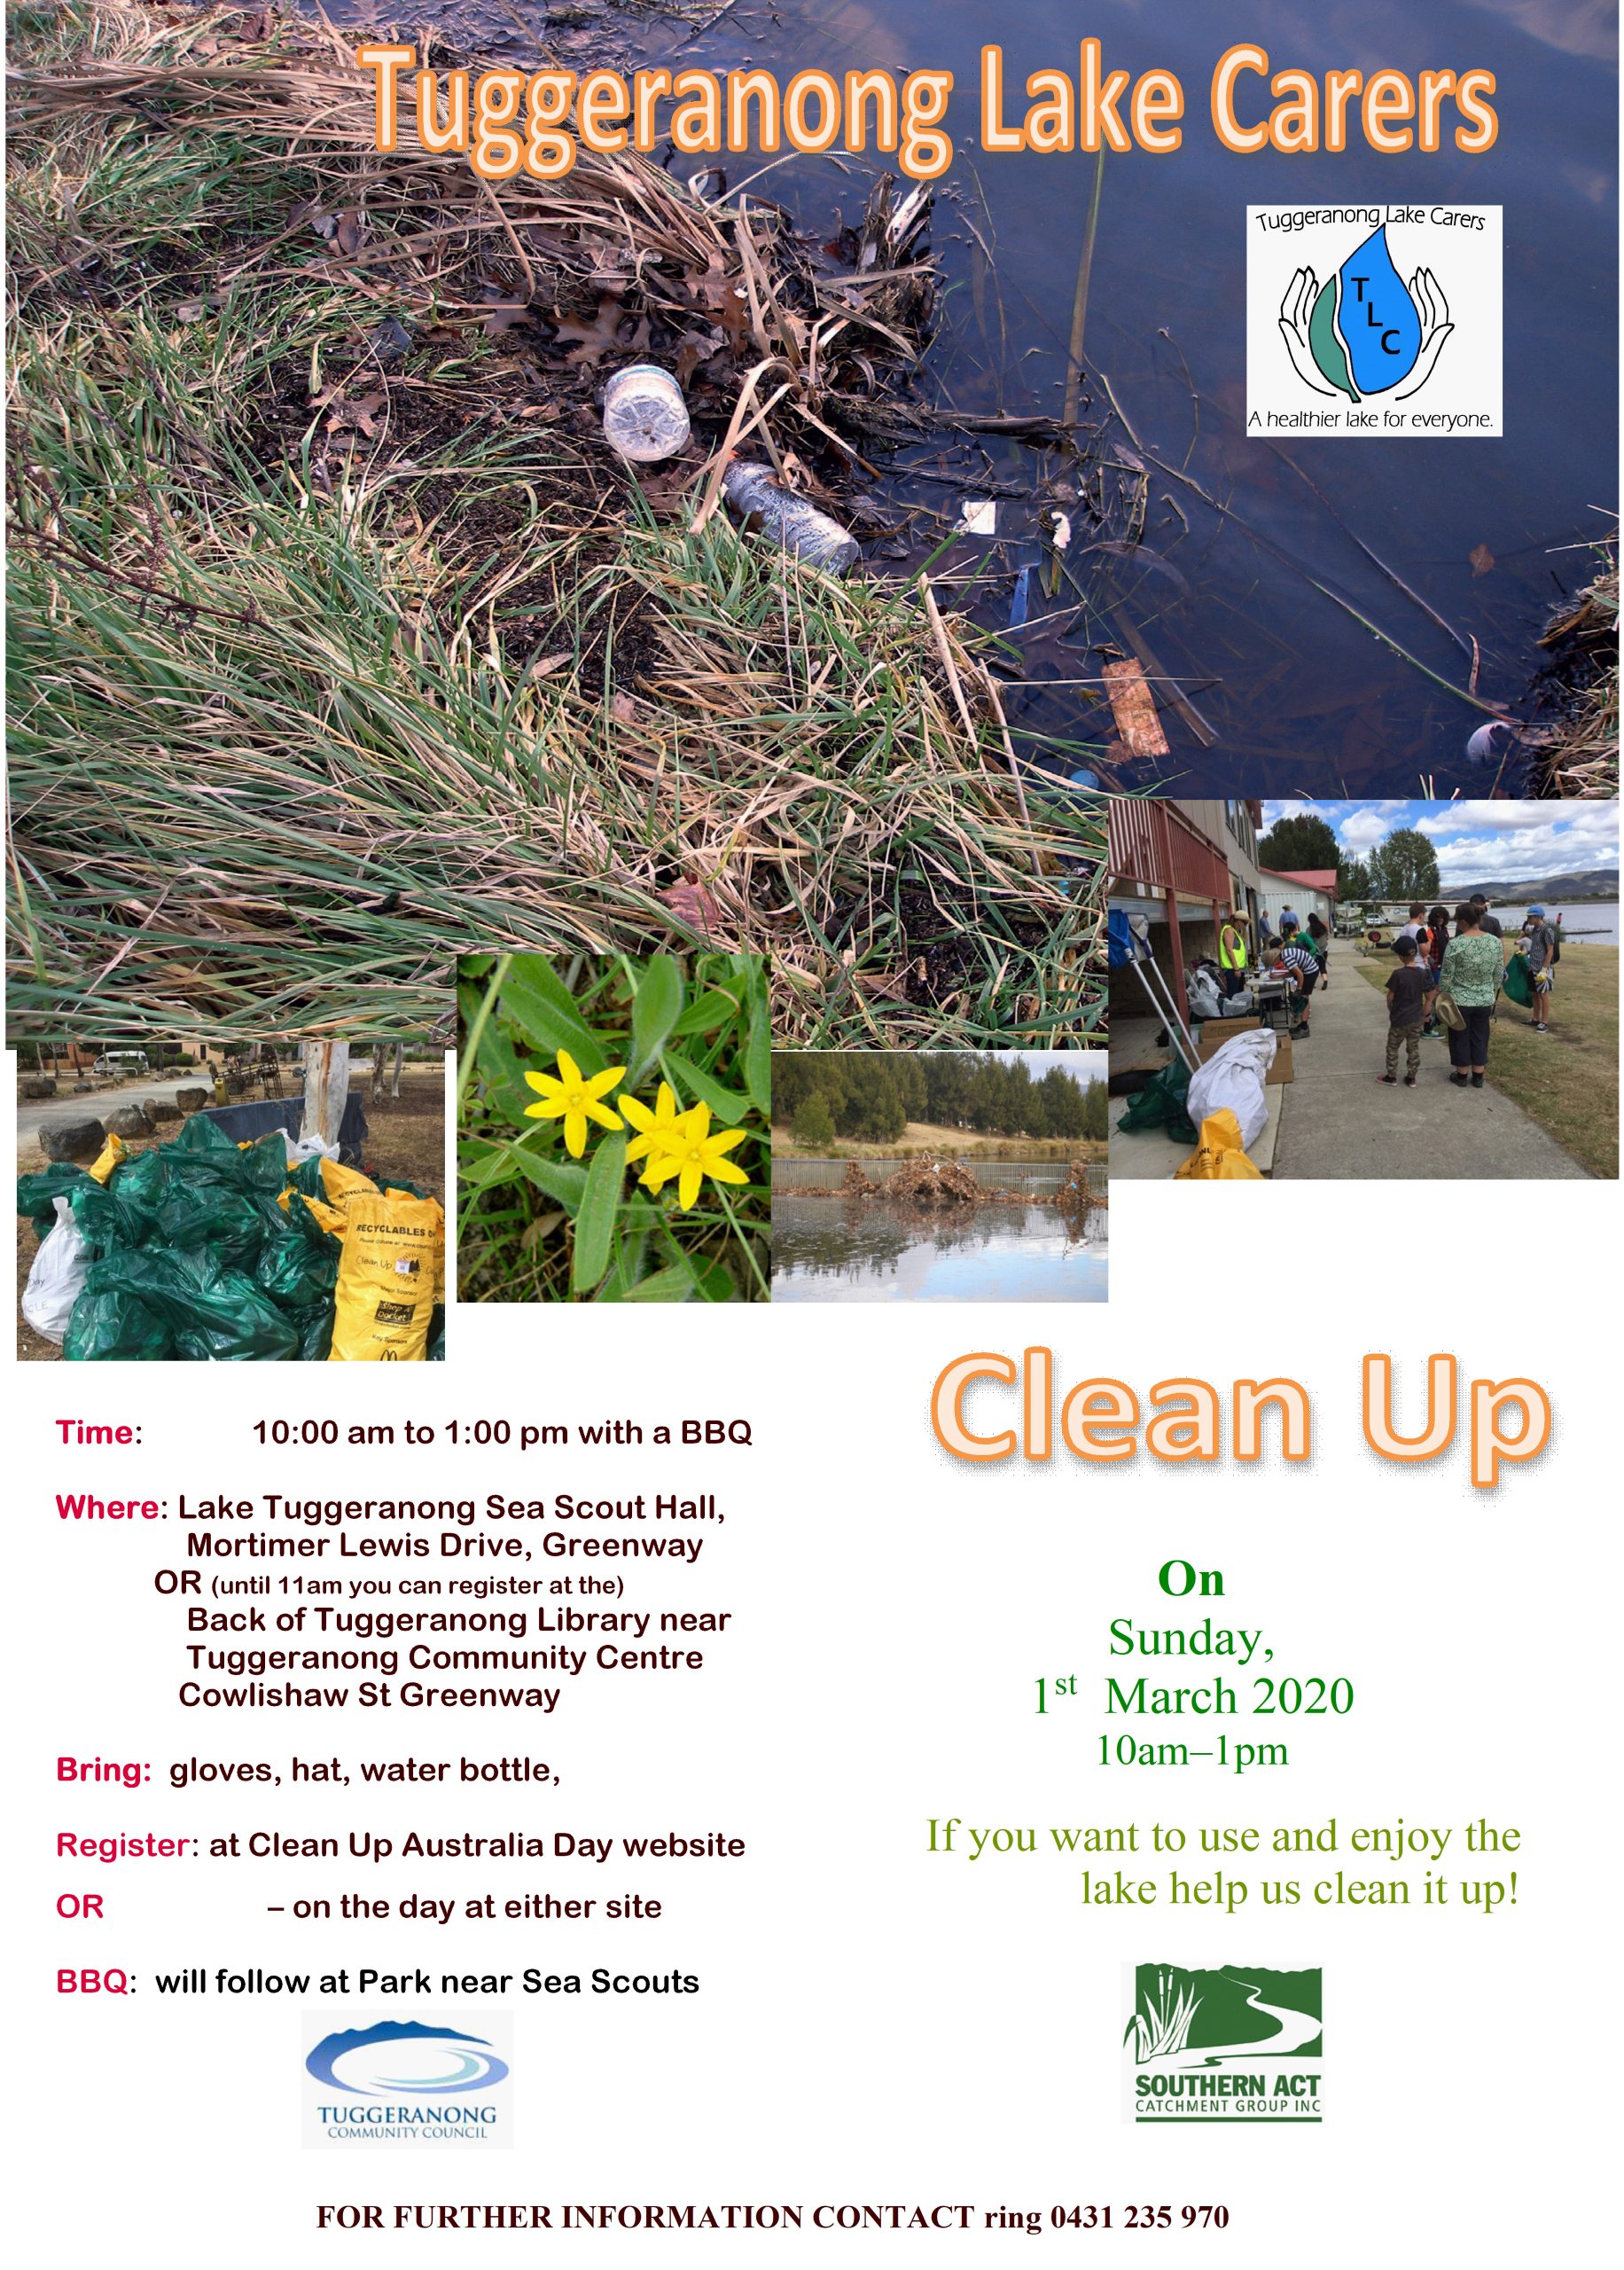 Clean-Up Lake Tuggeranong on Sunday the 1st March